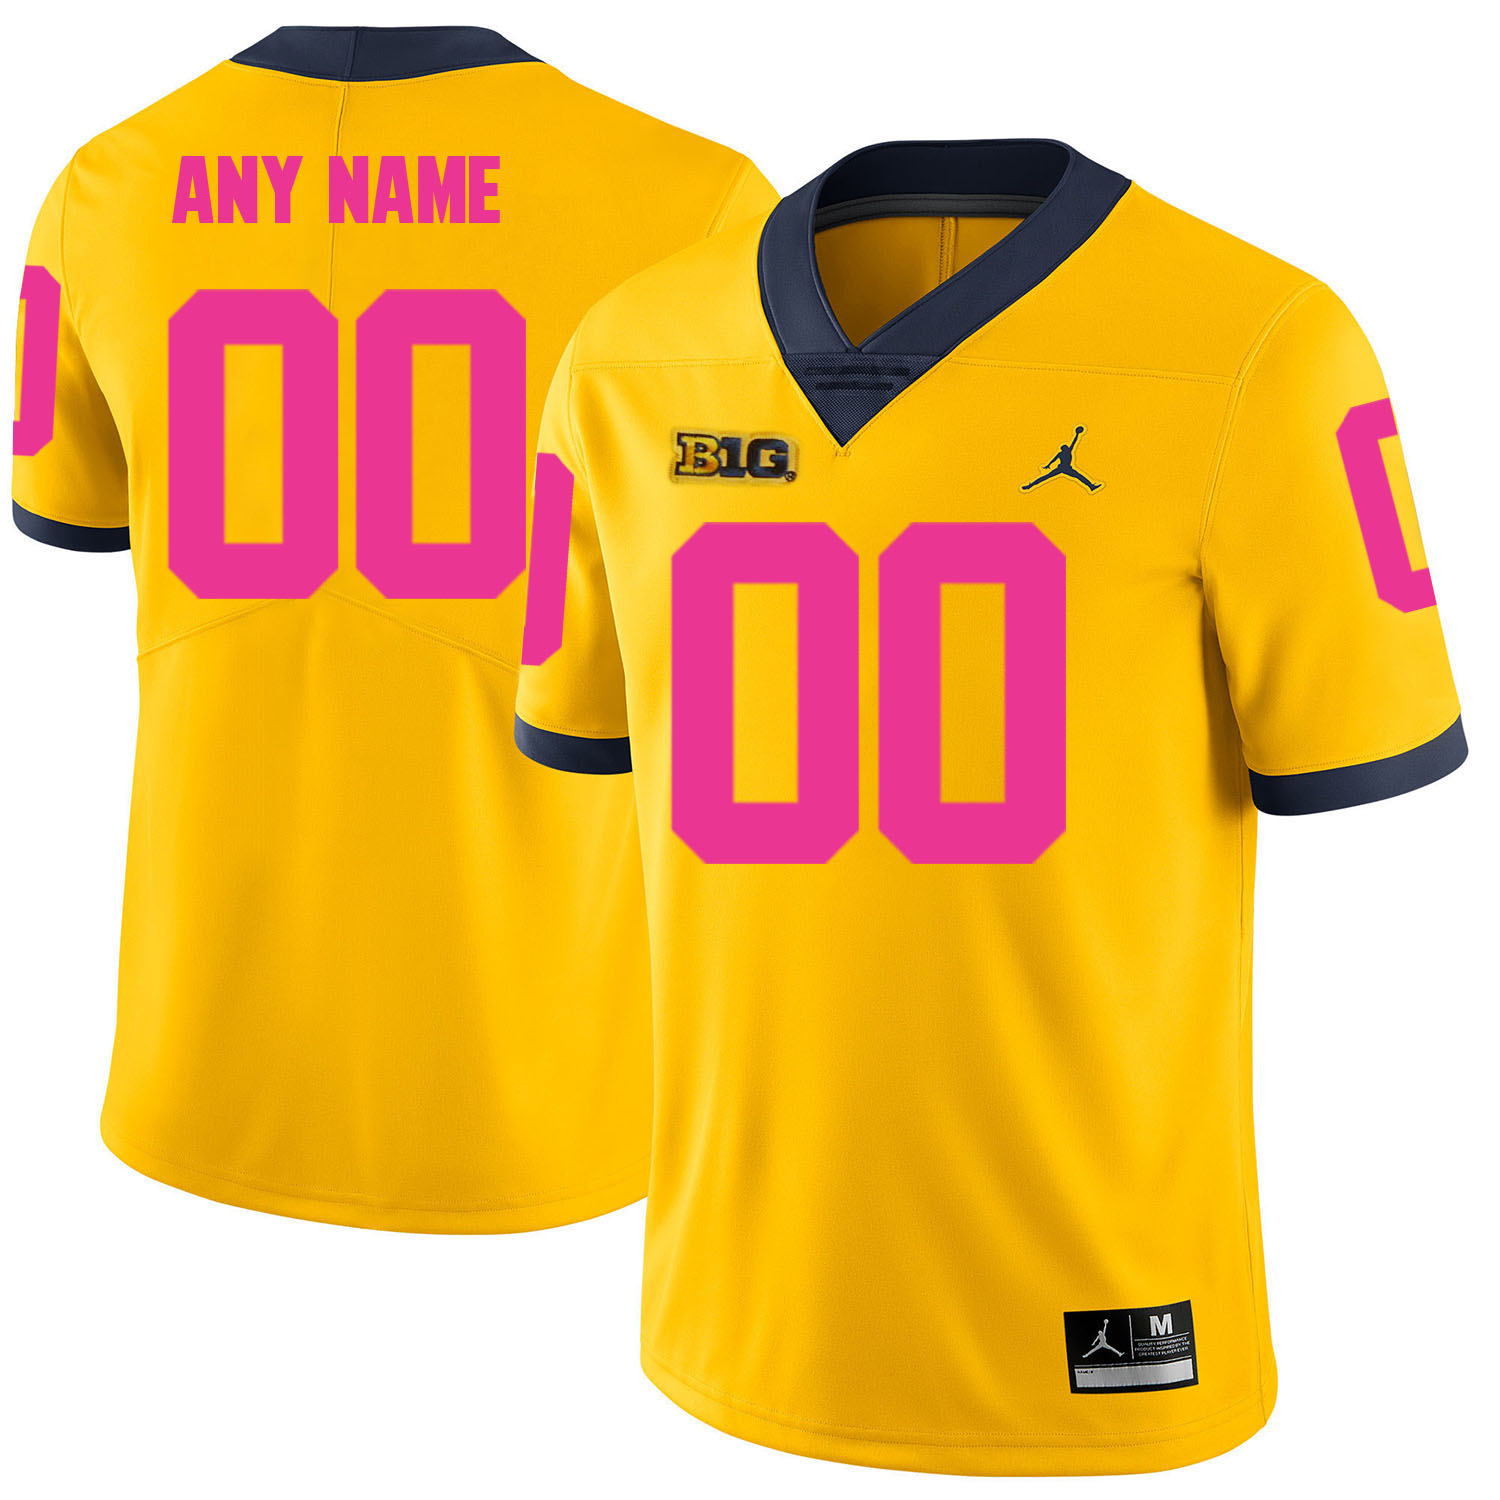 Michigan Wolverines Yellow 2018 Breast Cancer Awareness Men's Customized College Football Jersey